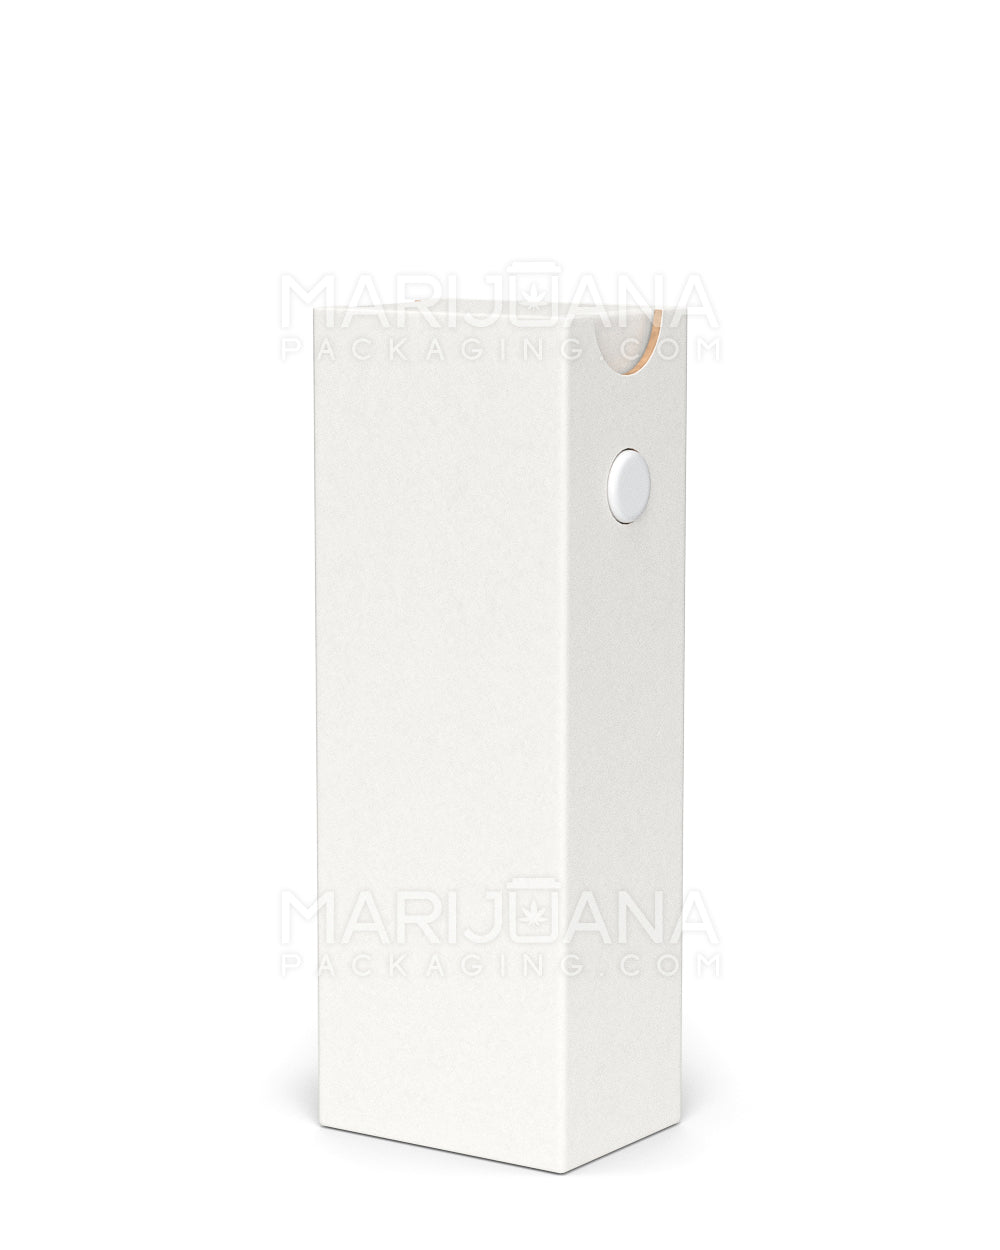 Child Resistant & Sustainable | 100% Recyclable Cardboard Vape Cartridge Box w/ Button & Foam Insert | 100mm - White  - 4